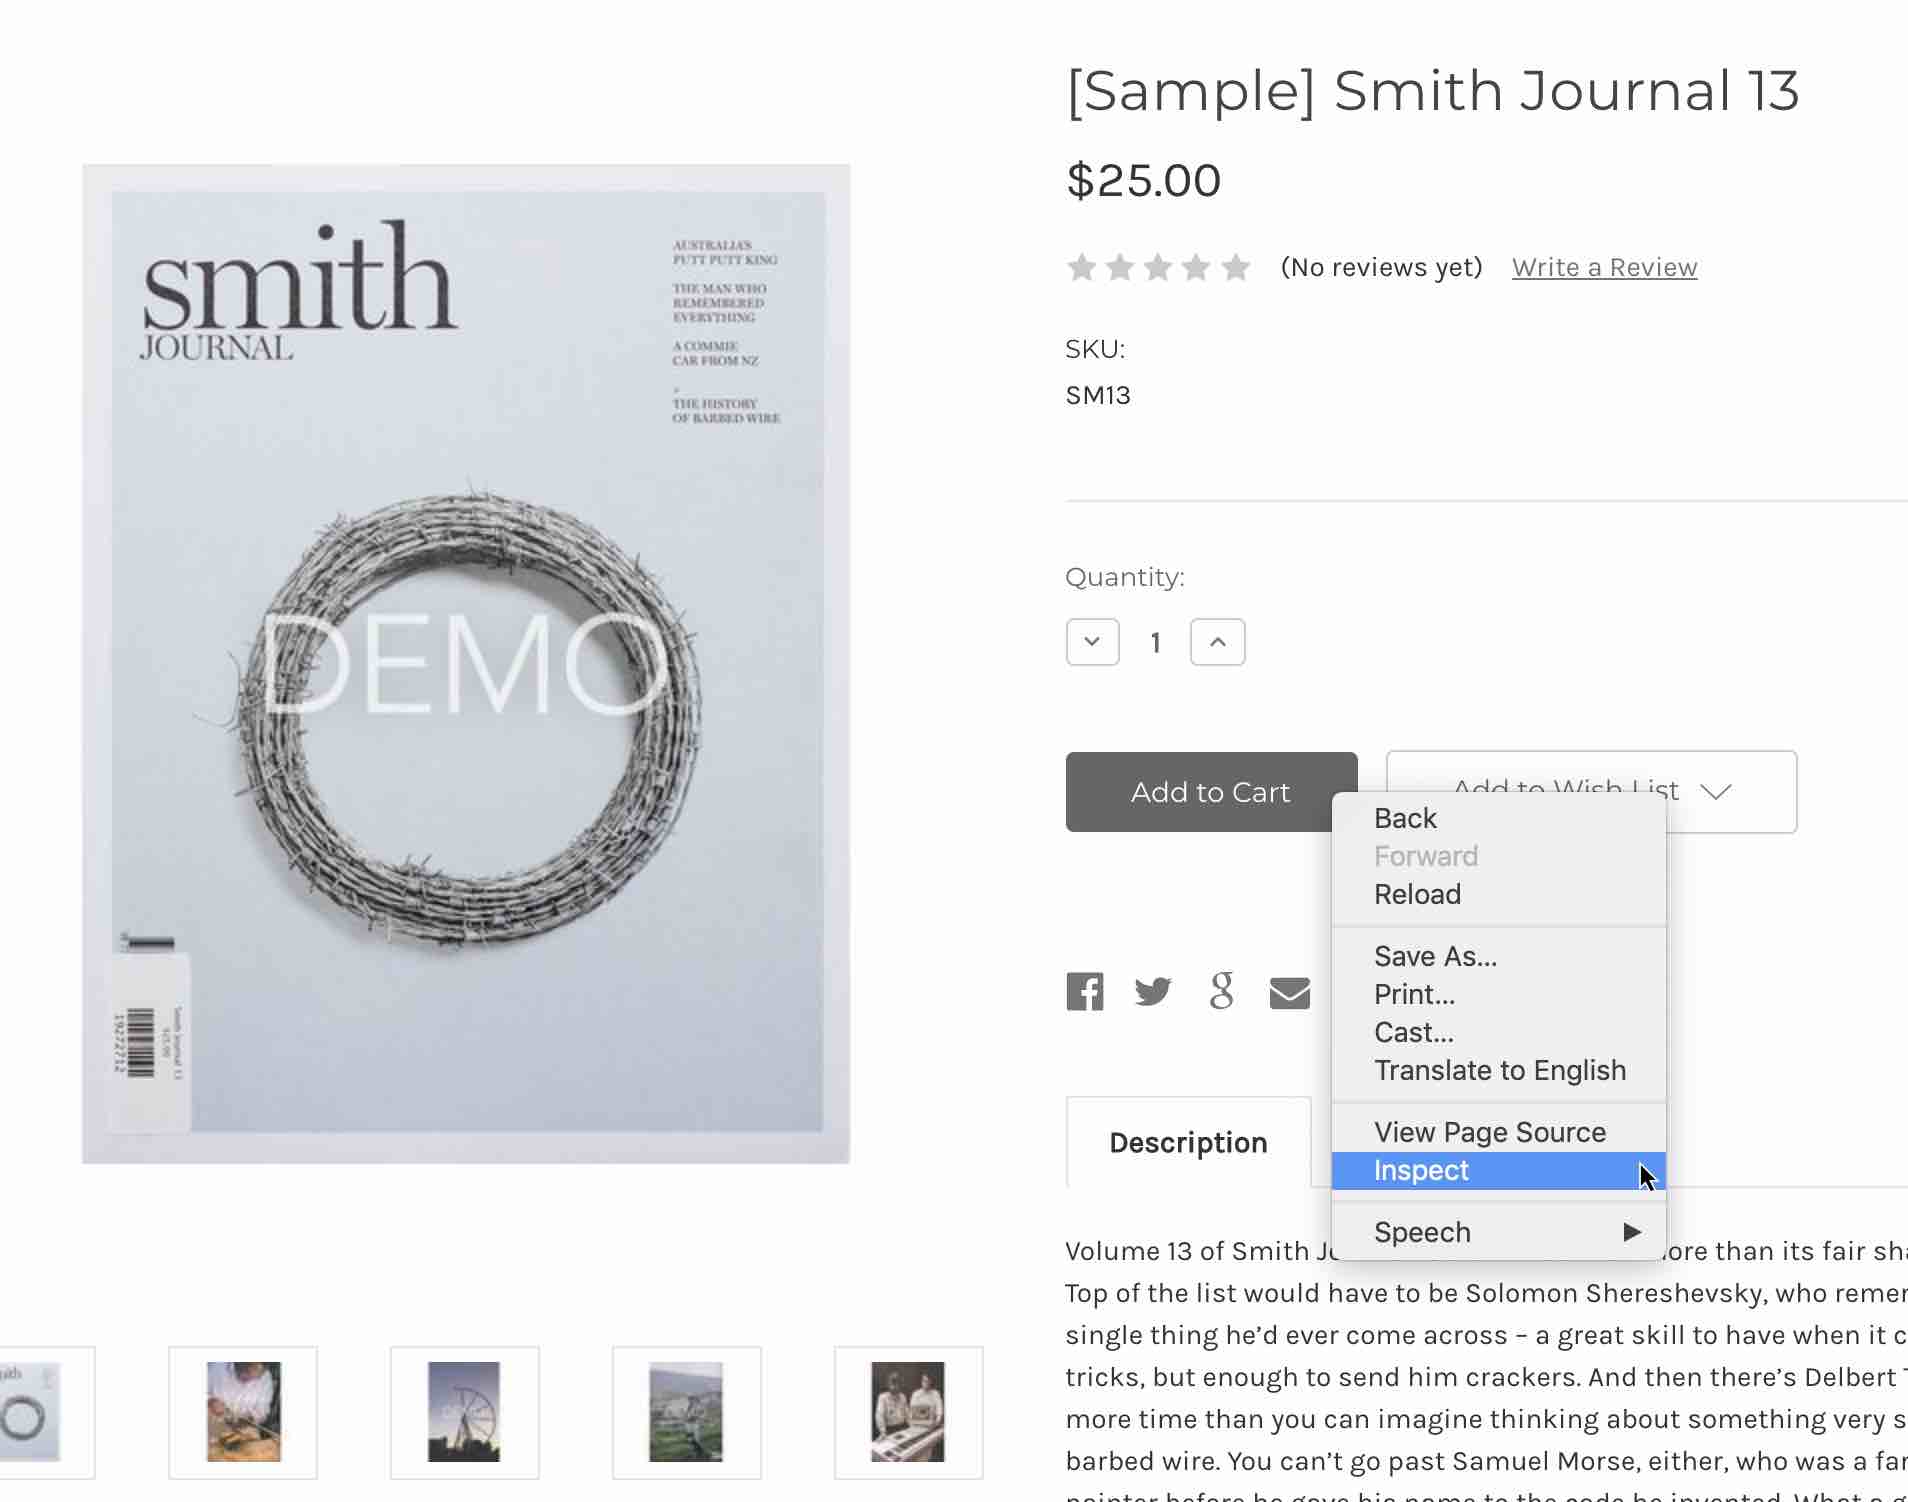 BigCommerce store with demo item Smith Journal, right click menu open on Add to Cart button with Inspect highlighted in blue